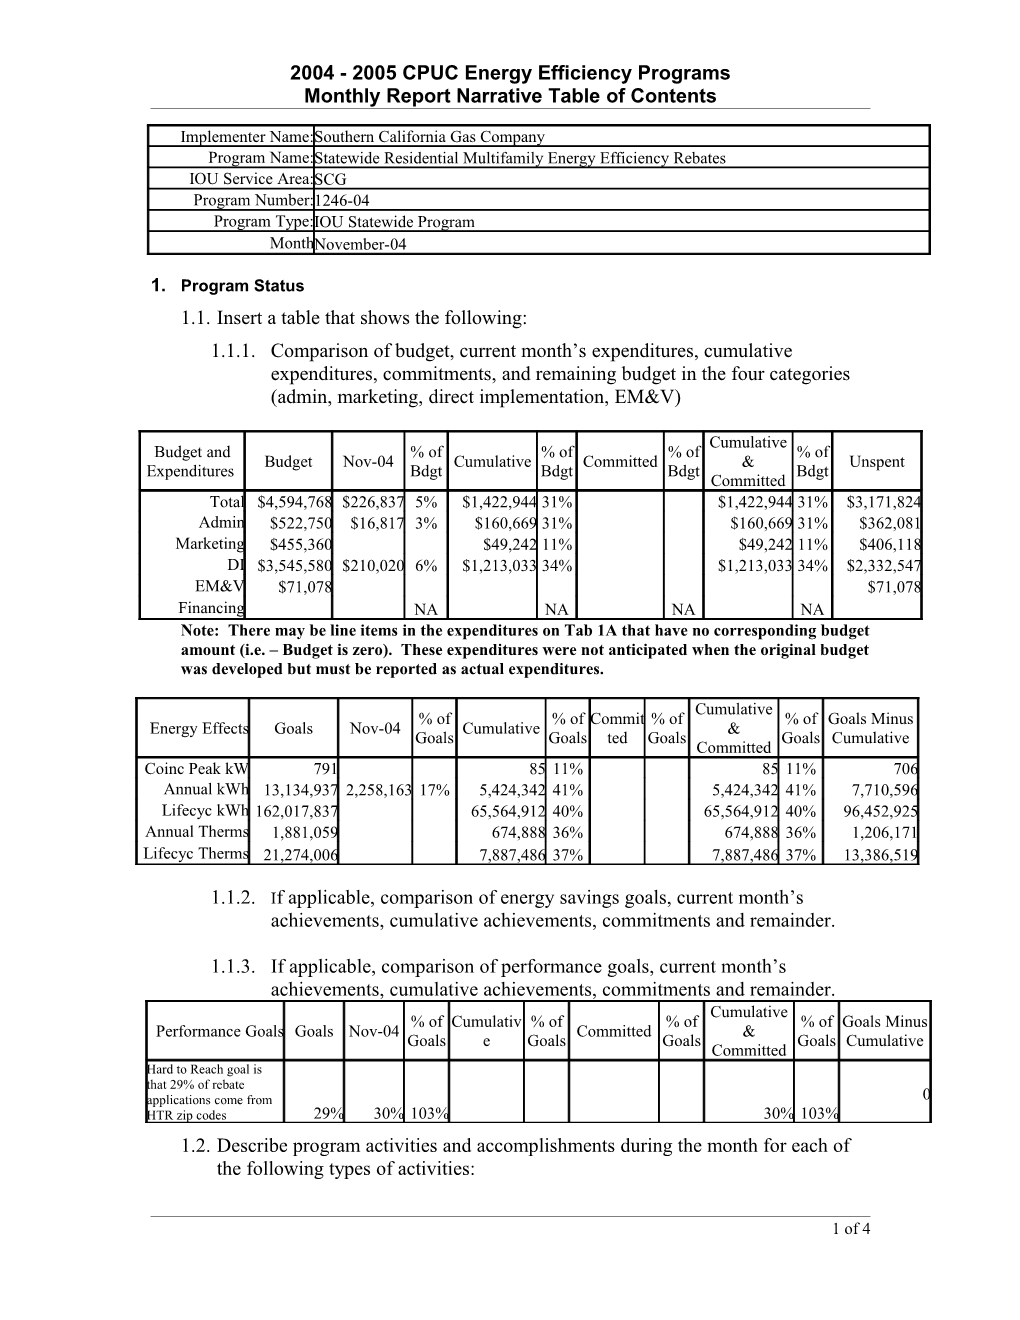 PY 2002 Energy Efficiency Reporting Requirements s3